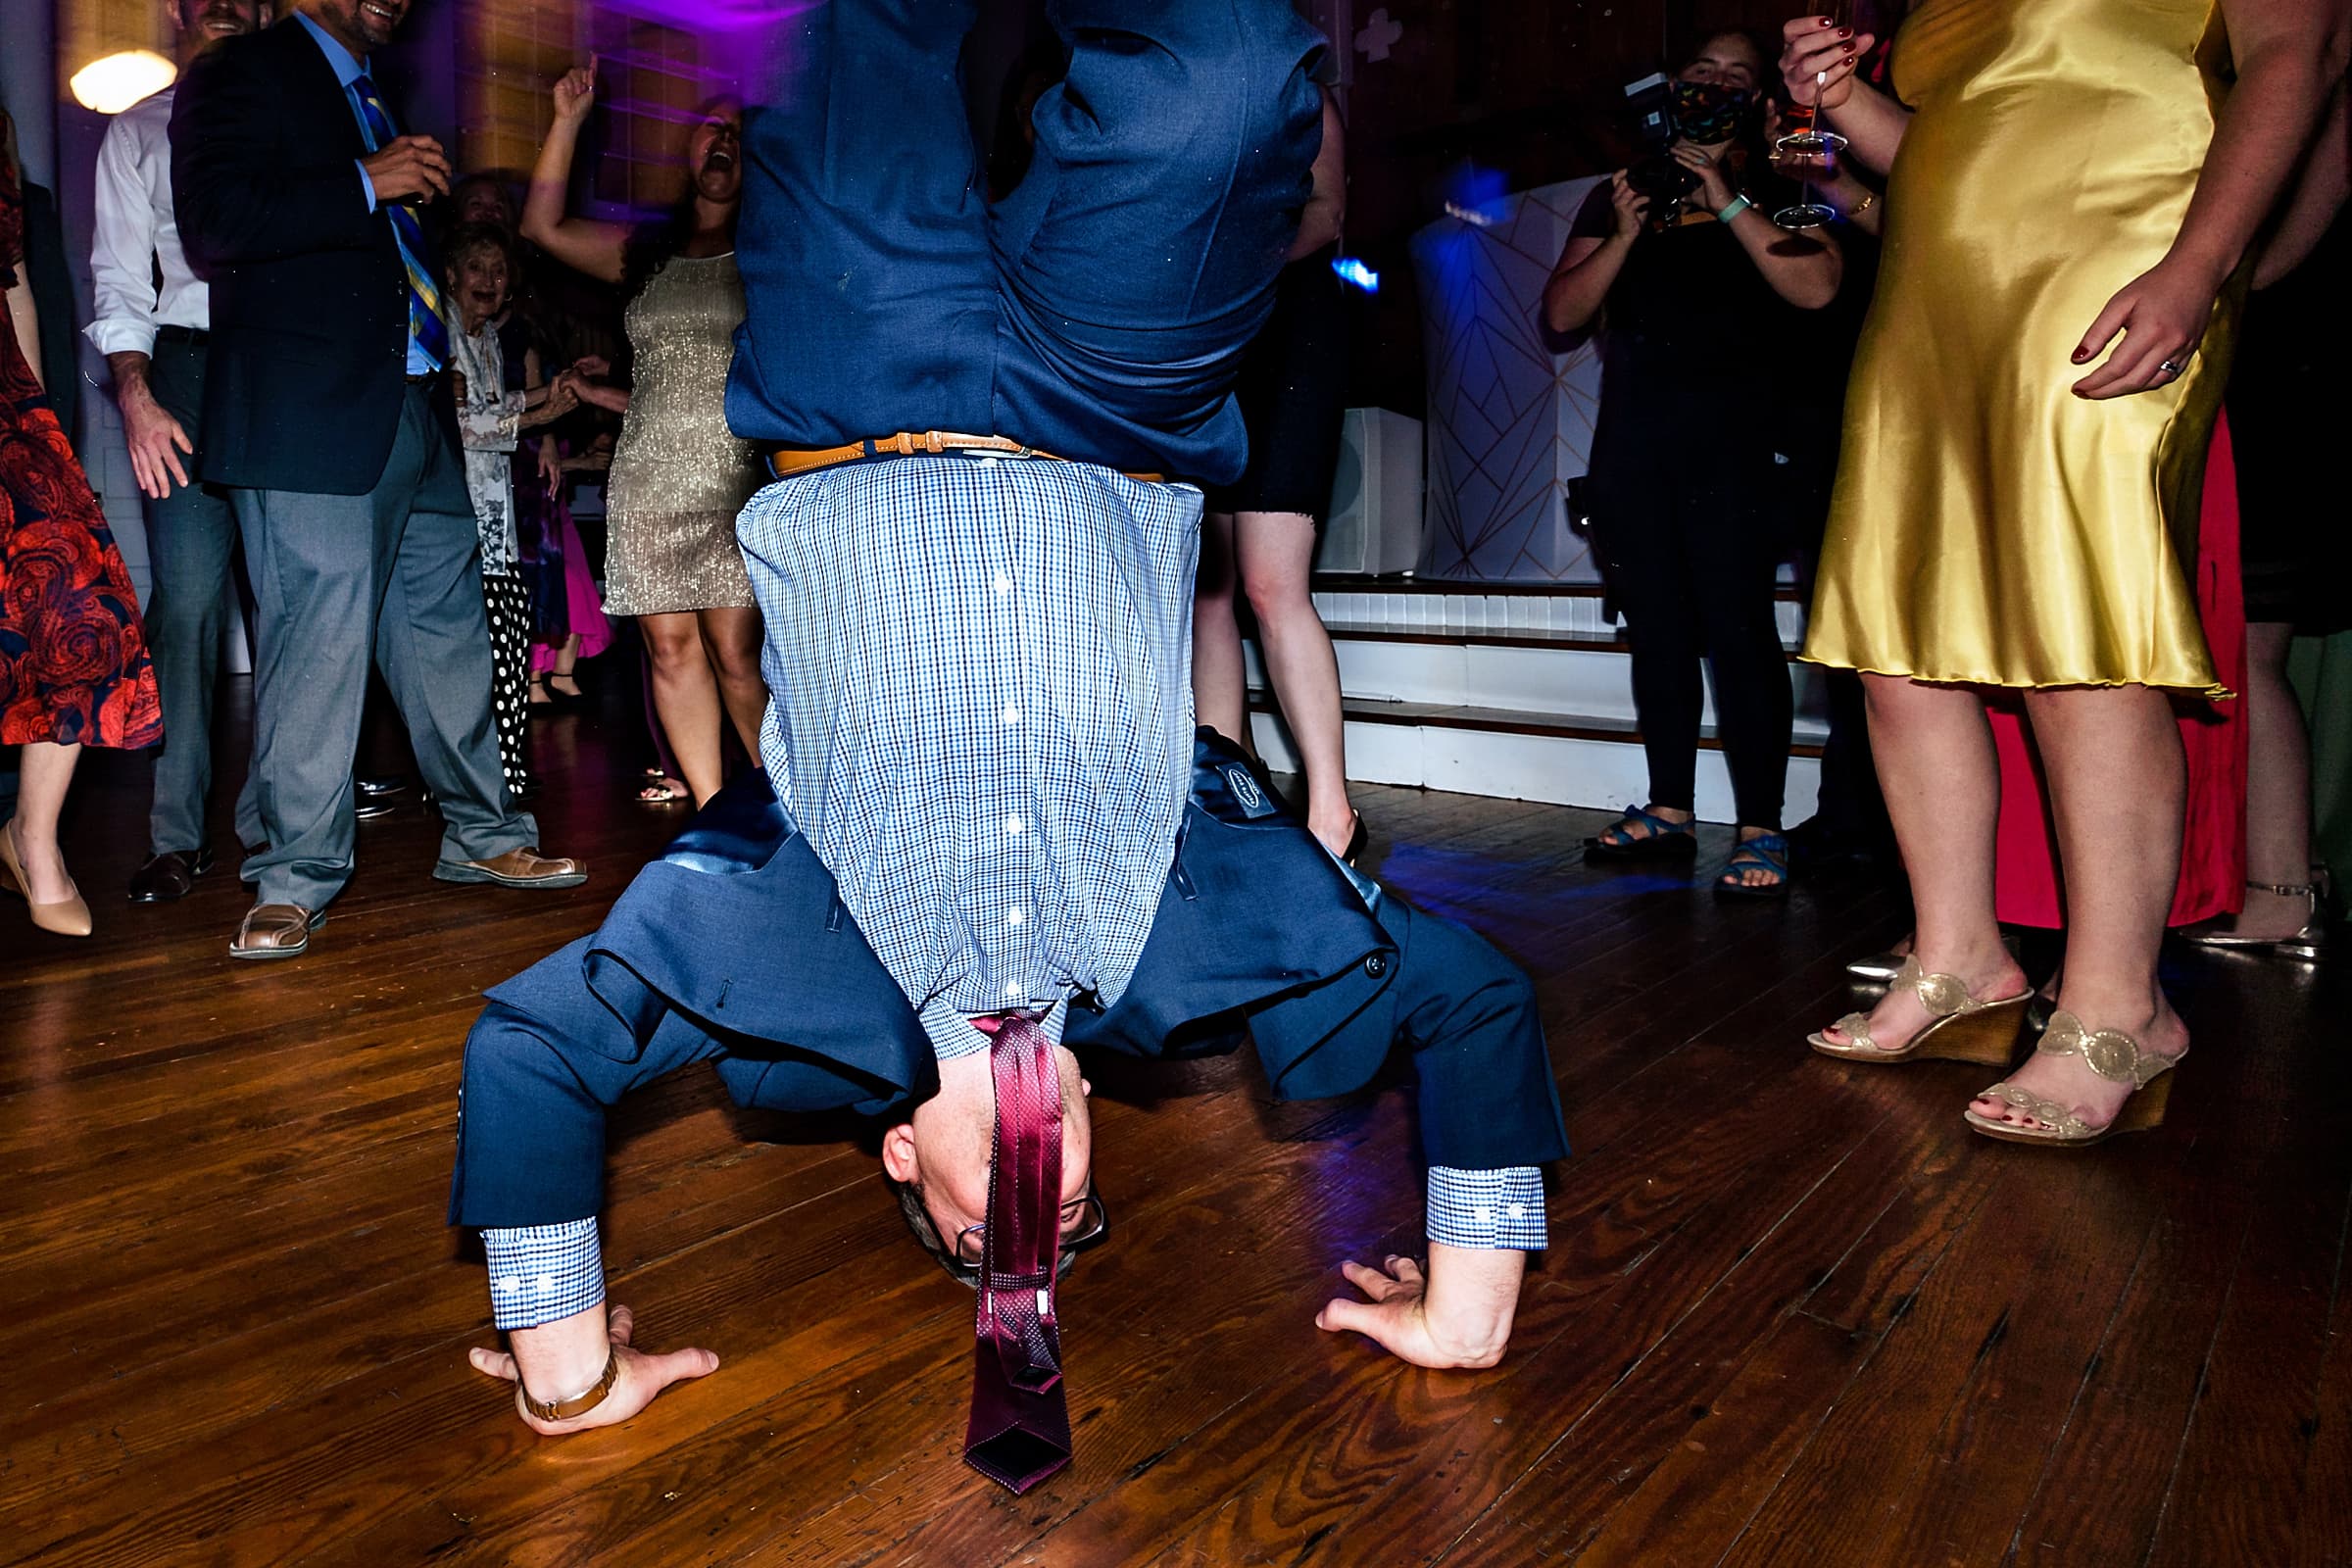 Are you inviting friends to your wedding who will do headstands on the dancefloor?